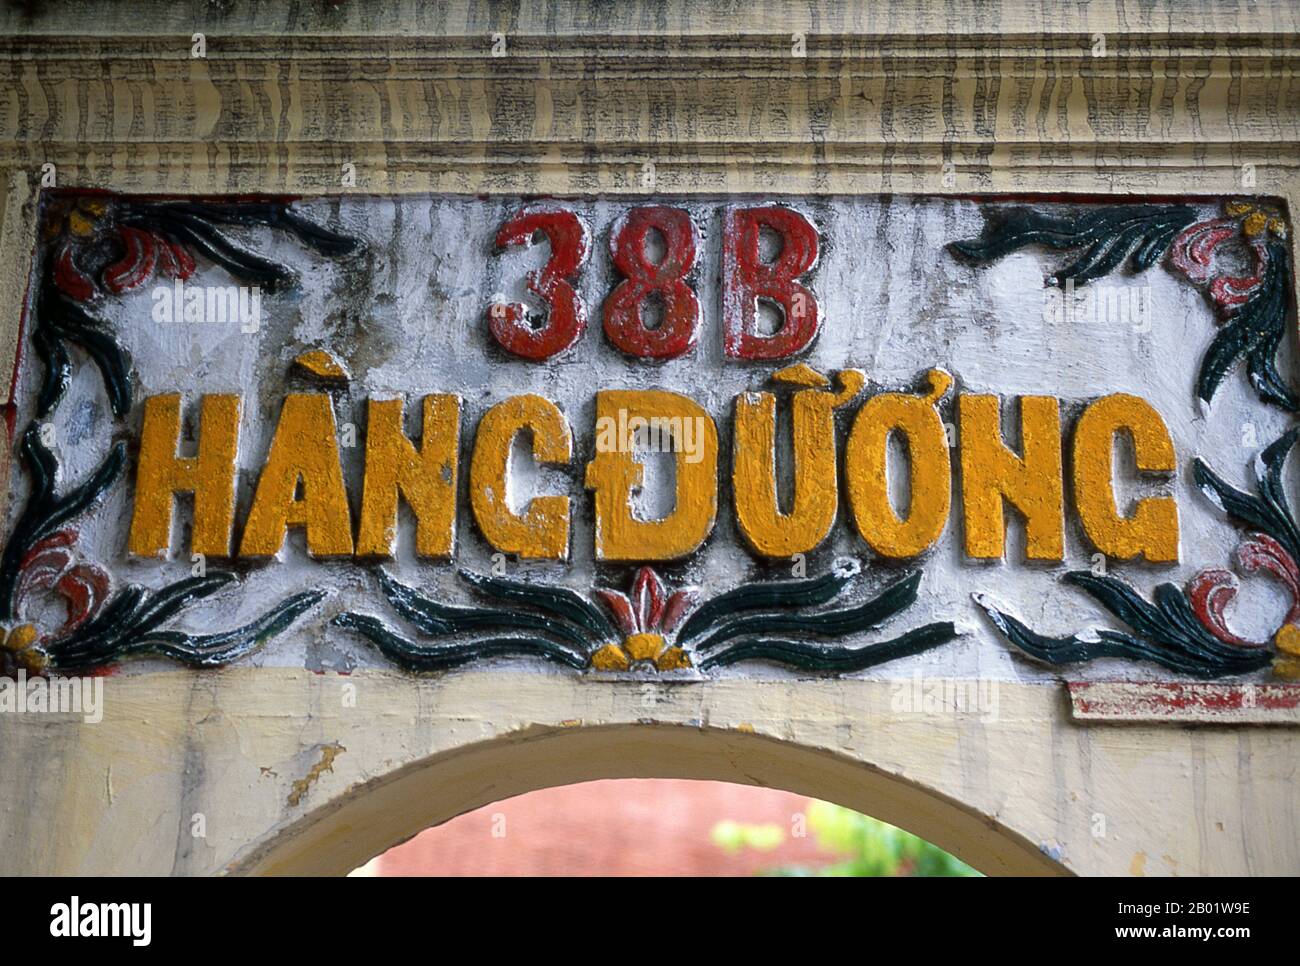 Vietnam: Colonial era house sign on Hang Duong (Sugar Street), Hanoi Old Quarter.  Hanoi's Old Quarter lies immediately north of Ho Hoan Kiem lake. It's better known locally as Bam Sau Pho Phuong or the ‘Thirty Six Streets’. 'Phuong' means a trade guild, and most of the streets begin with the word 'hang' meaning merchandise. This ancient section of the city has long been associated with commerce, and it remains very much so today. Stock Photo